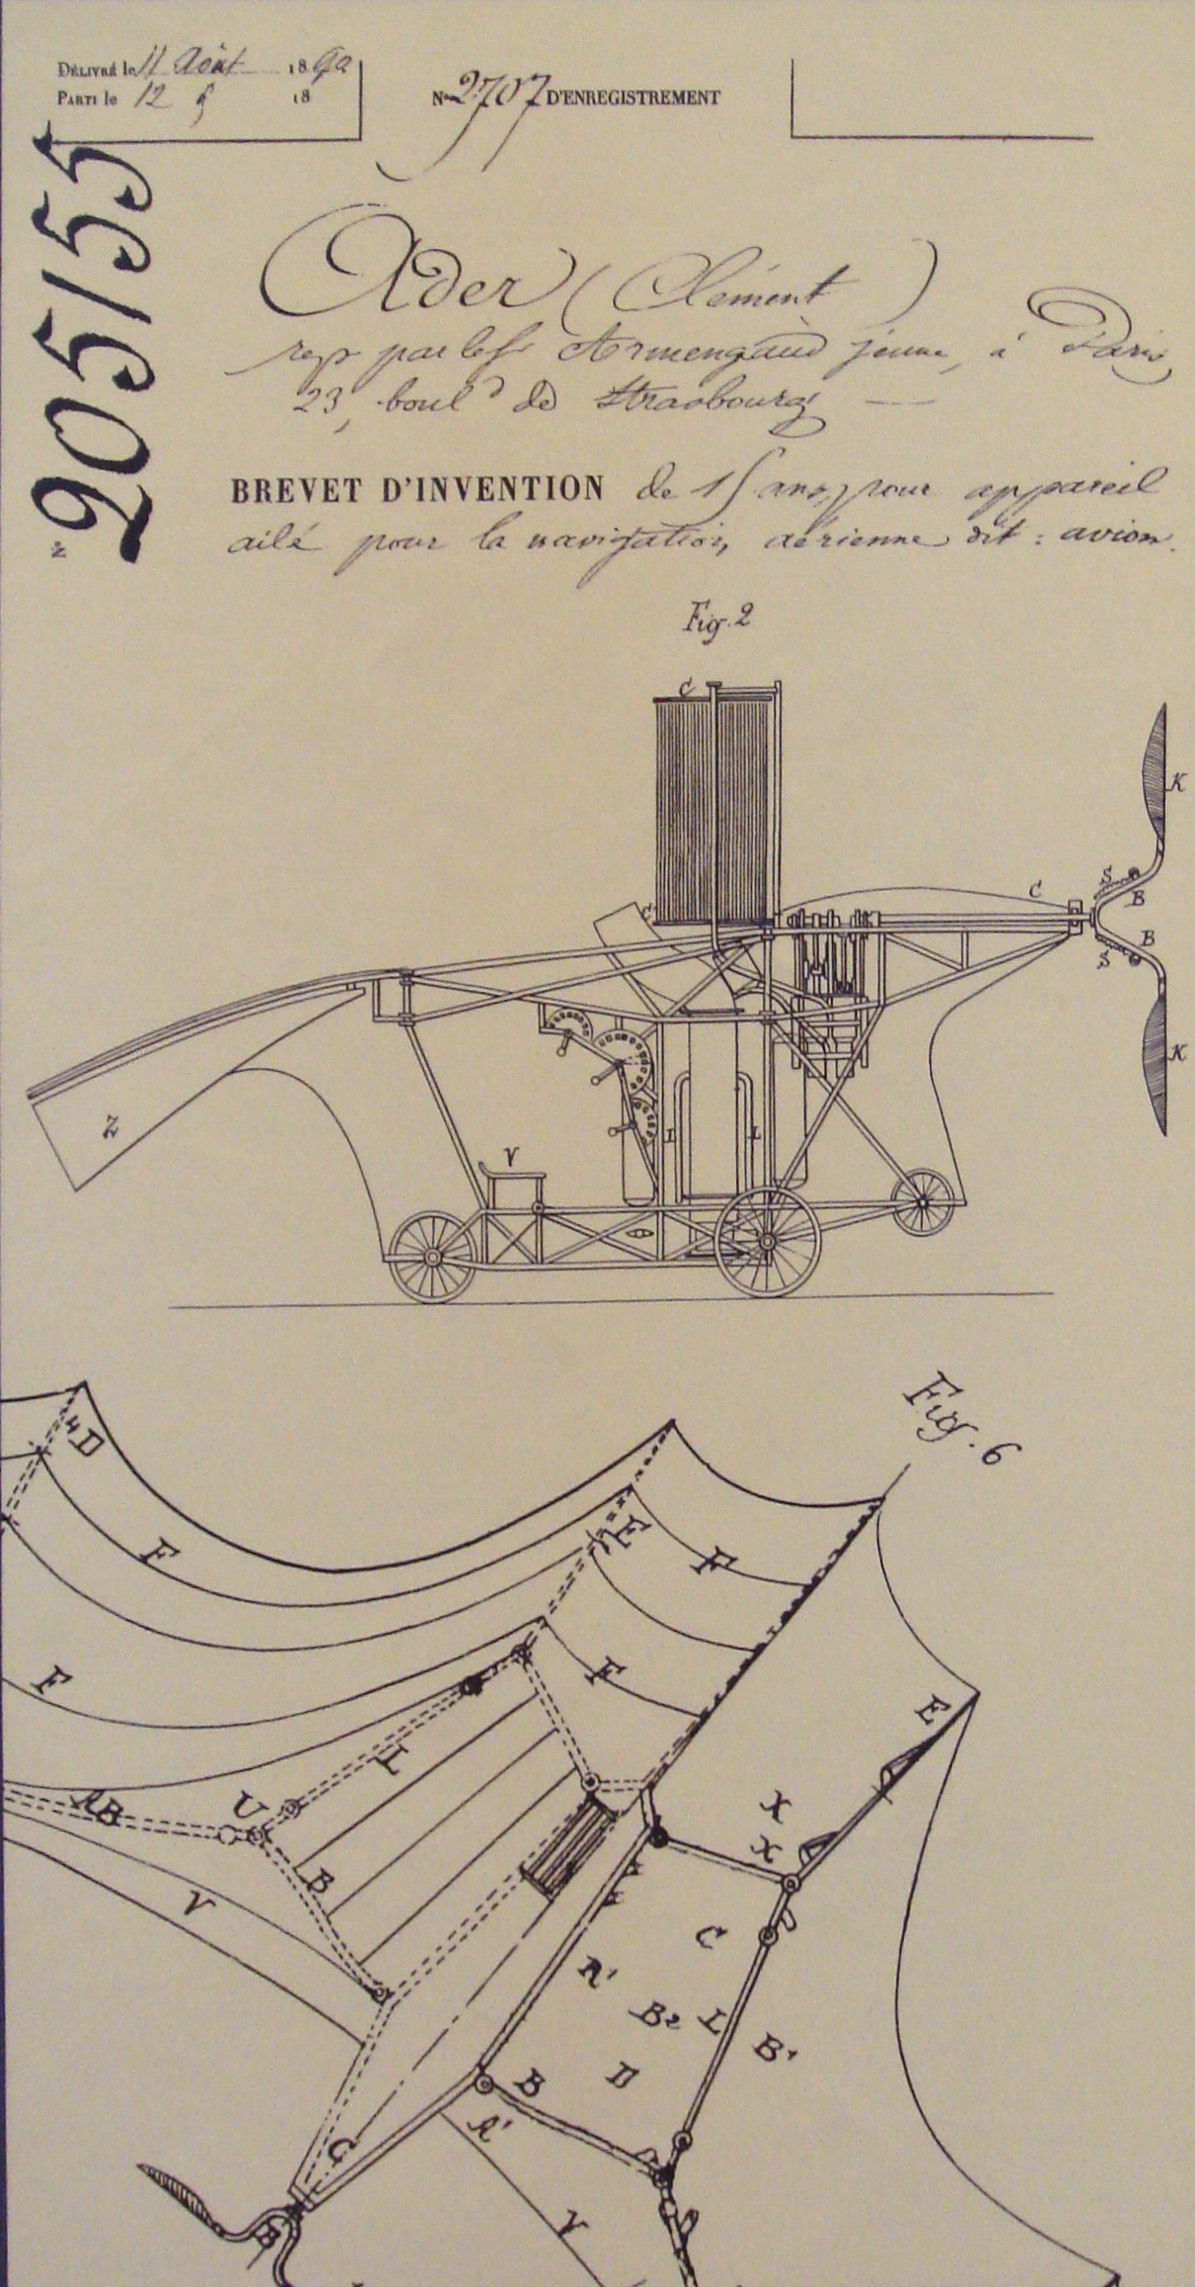 Patent issued 19 April 1890